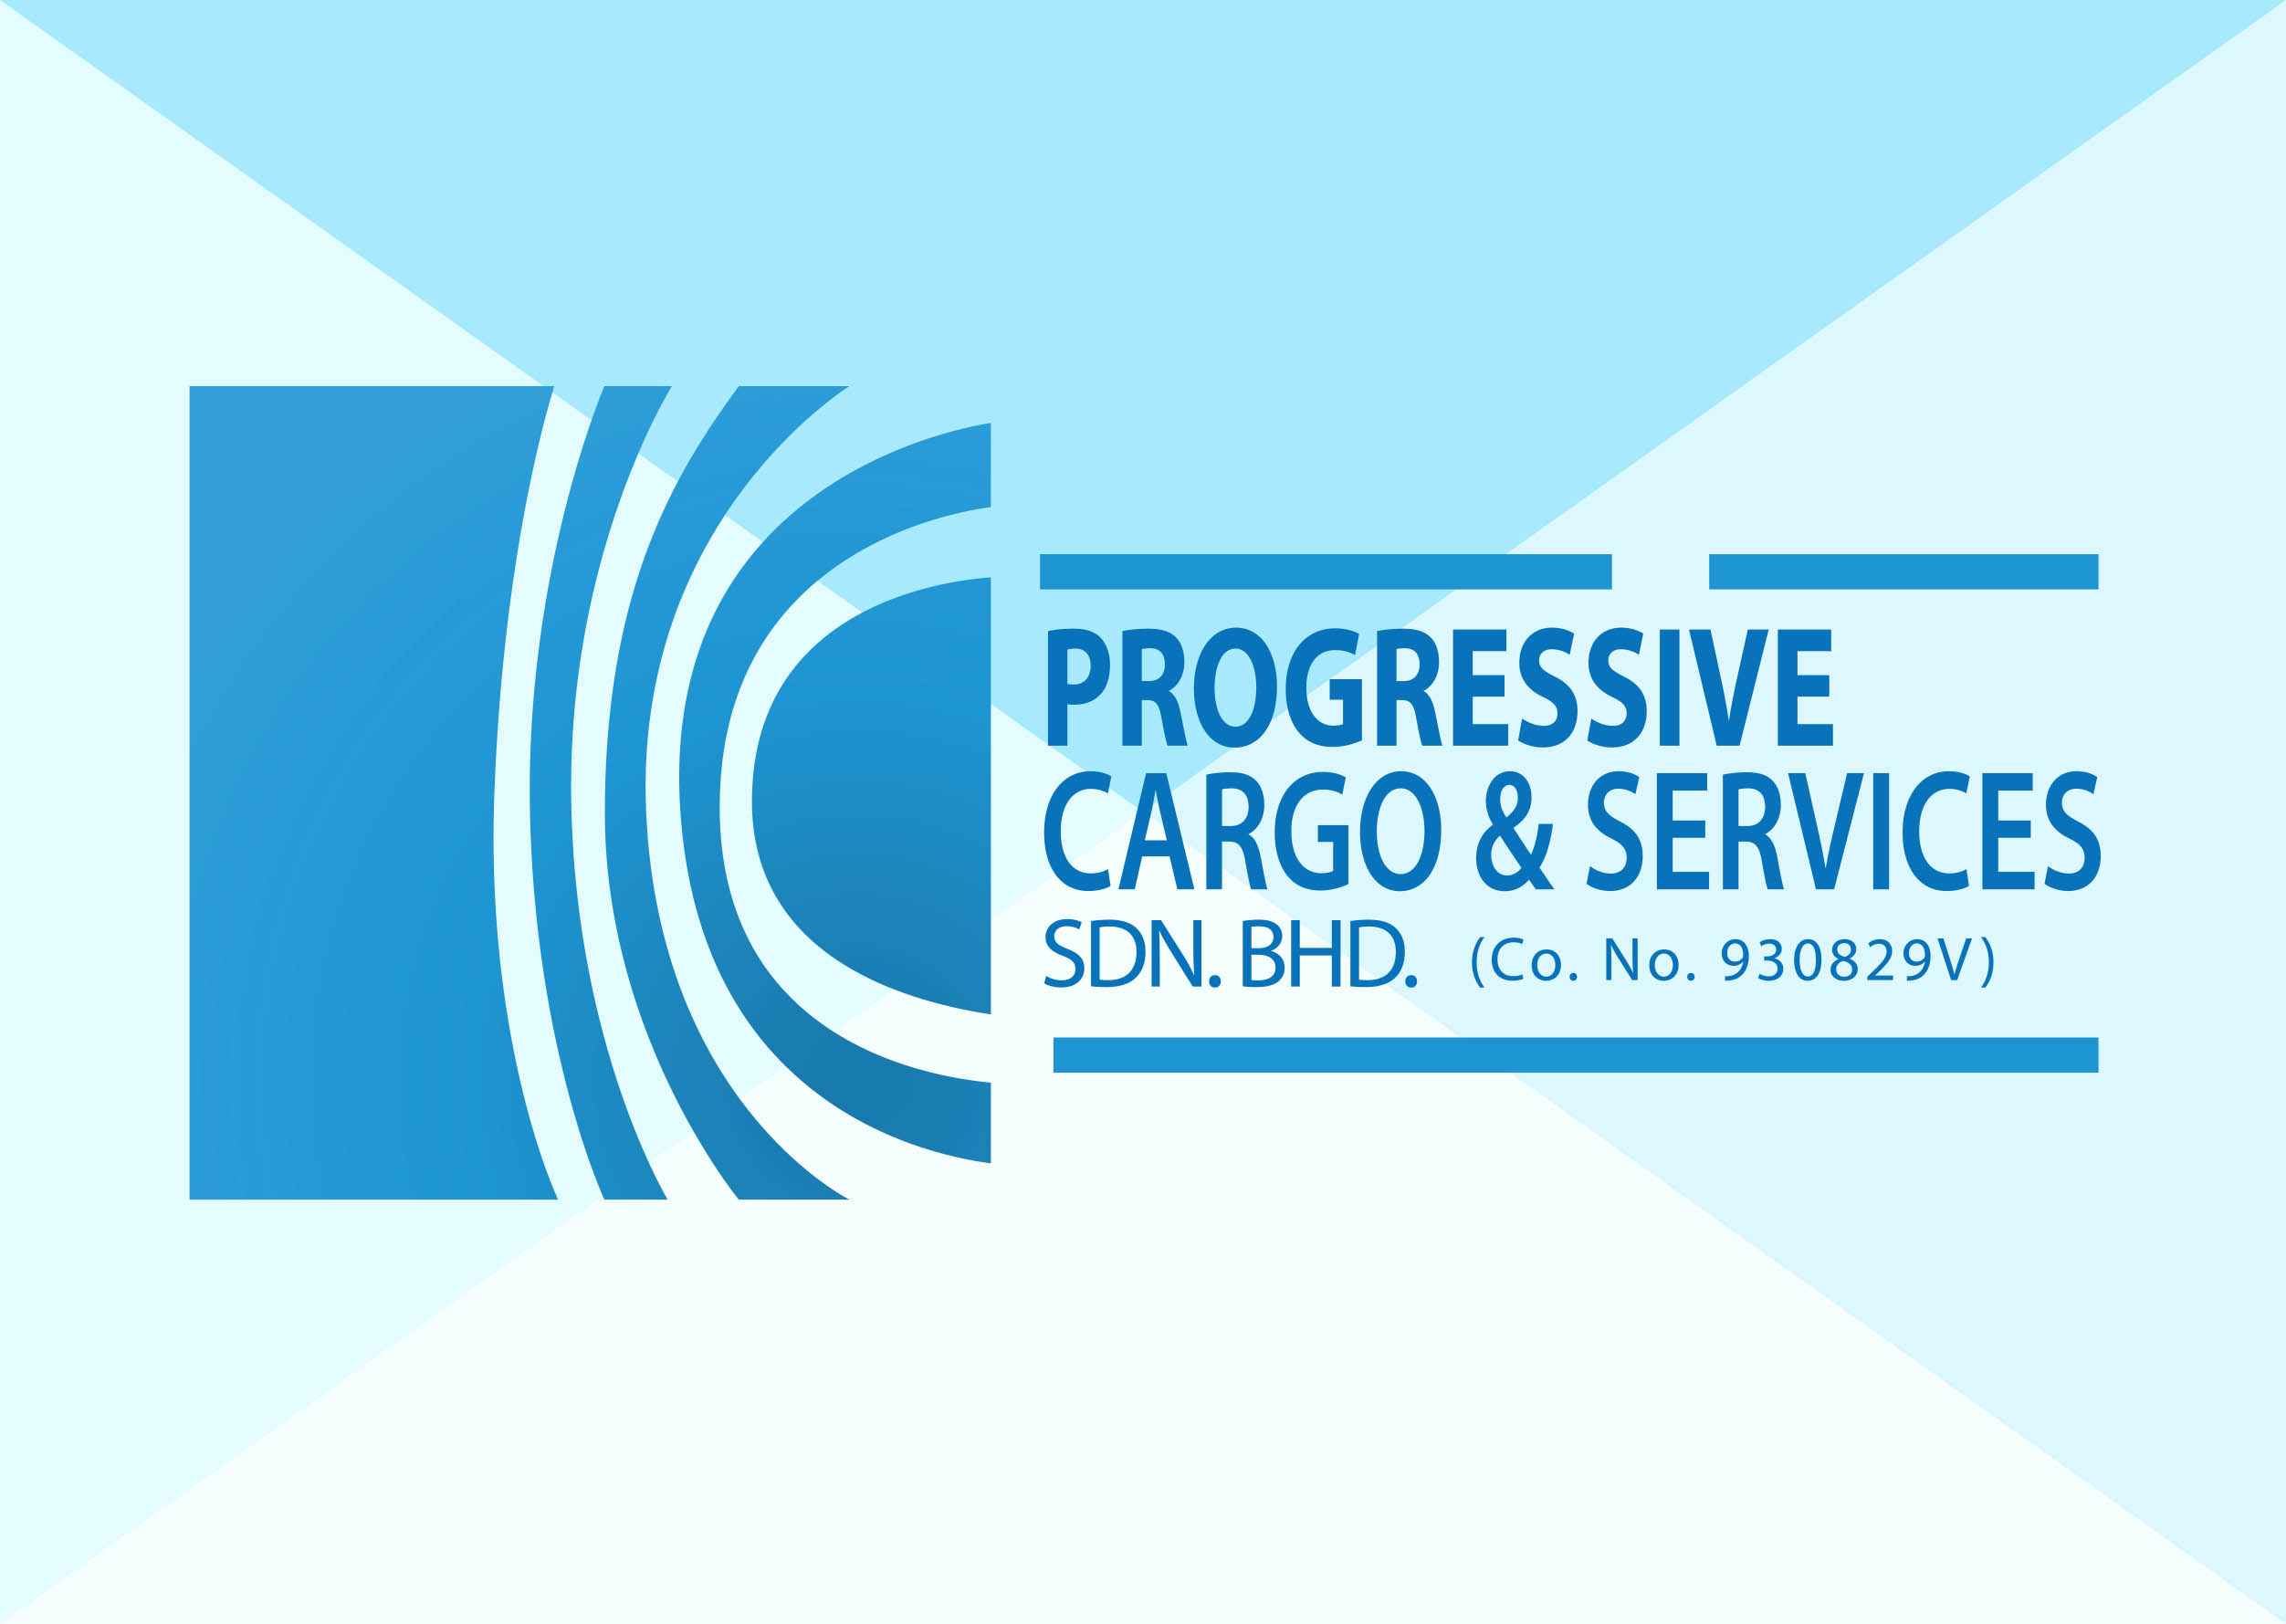 manpower services to cargo industry in malaysia